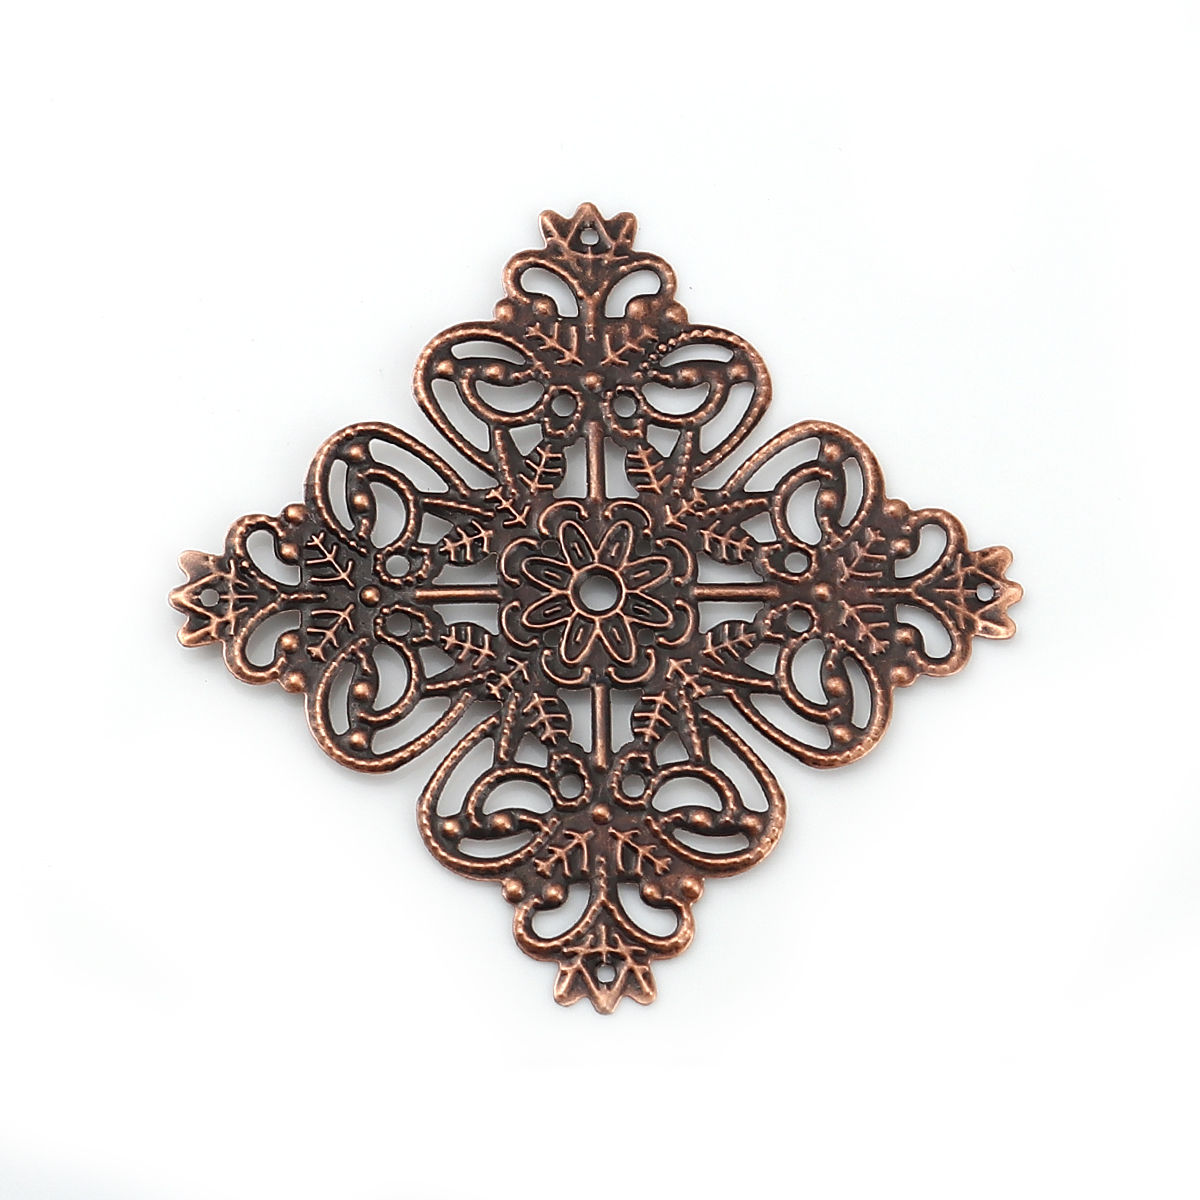 Picture of Iron Based Alloy Filigree Stamping Embellishments Square Silver Tone 56mm(2 2/8") x 56mm(2 2/8"), 30 PCs